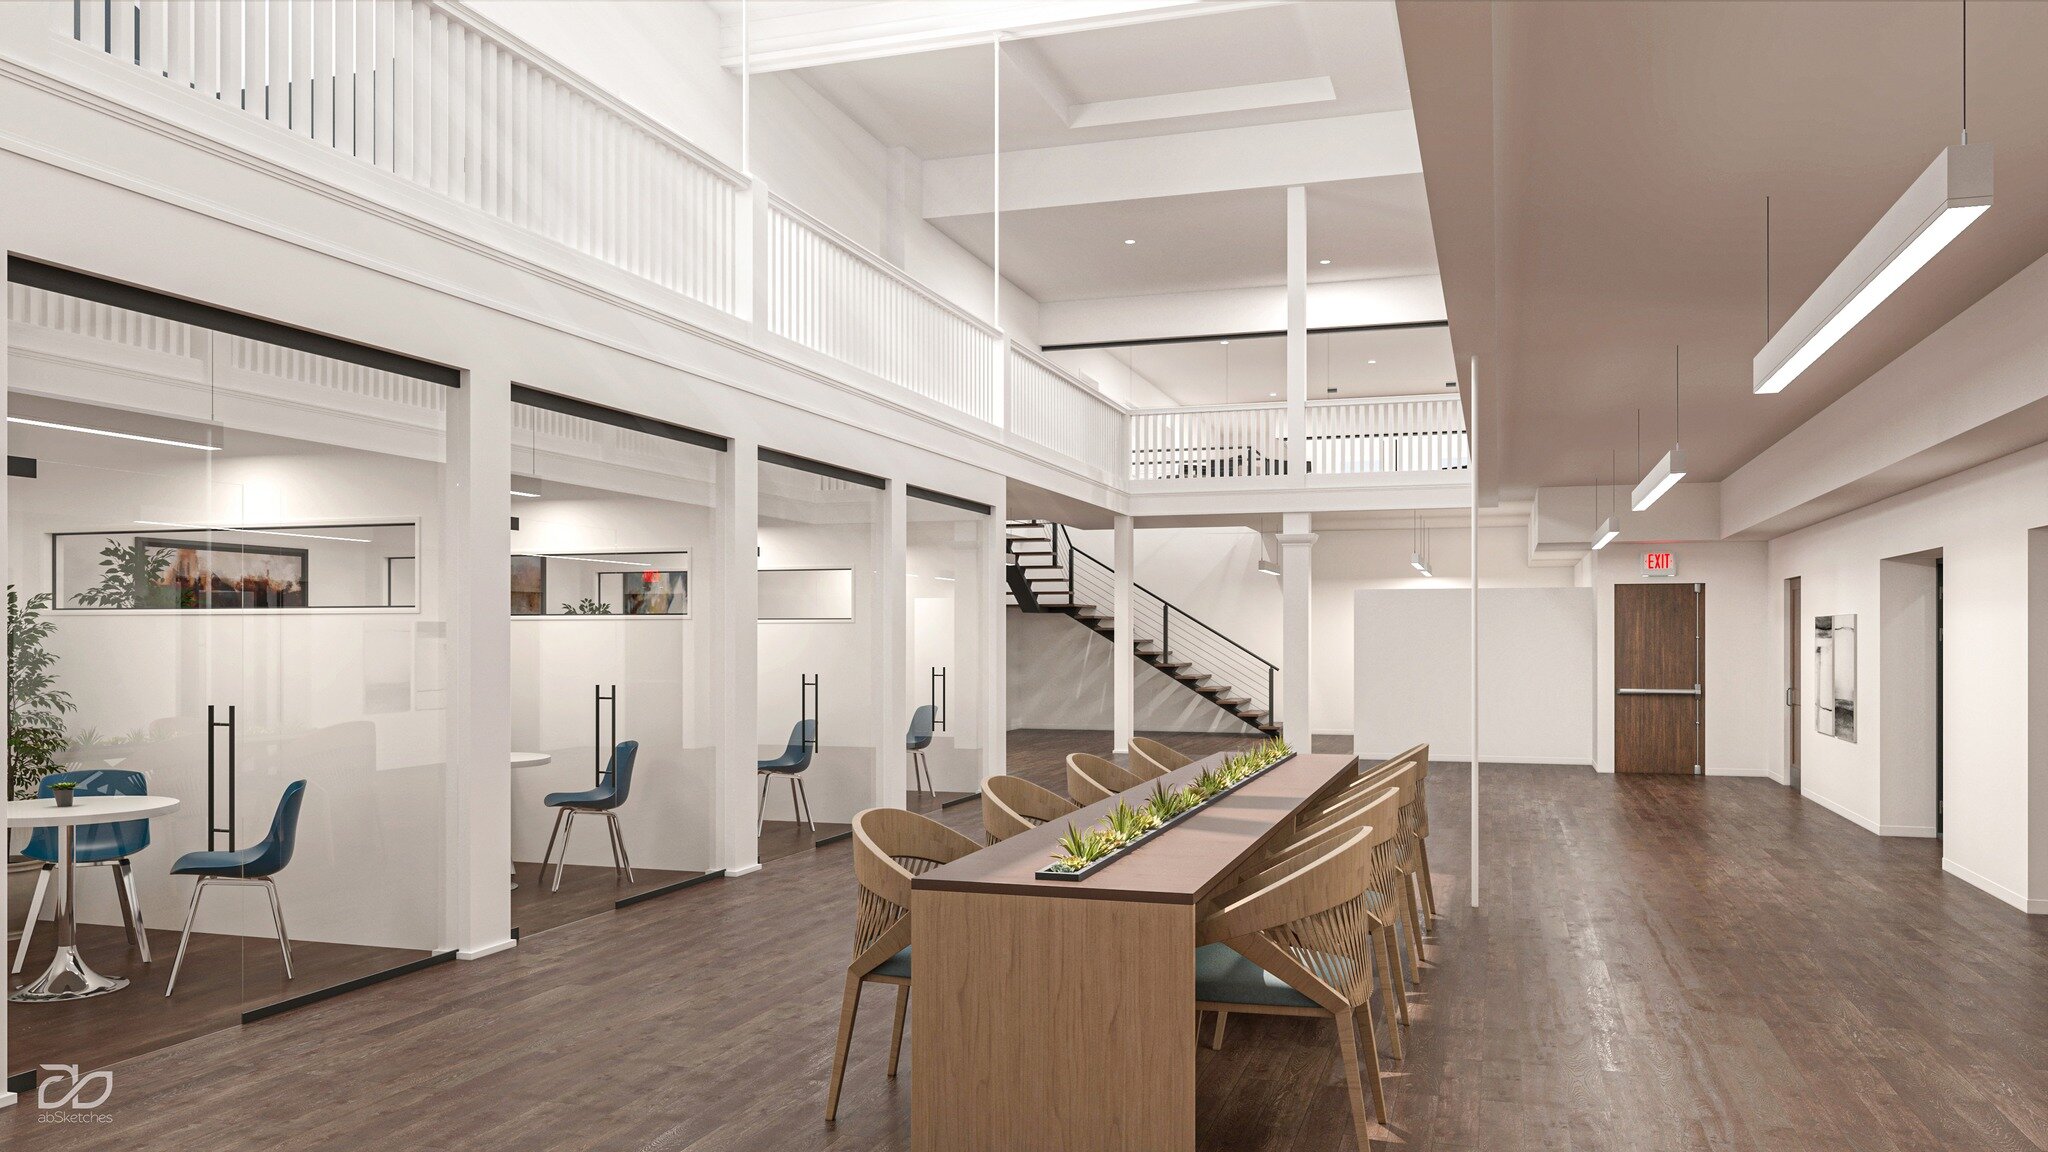 We had the pleasure of working with @cga.architects, Meeder Development, and Meeder Realty to re-imagine the beautiful space at the Christian Street Court.  A well positioned mixed-use neighborhood of businesses in the downtown investment district ri